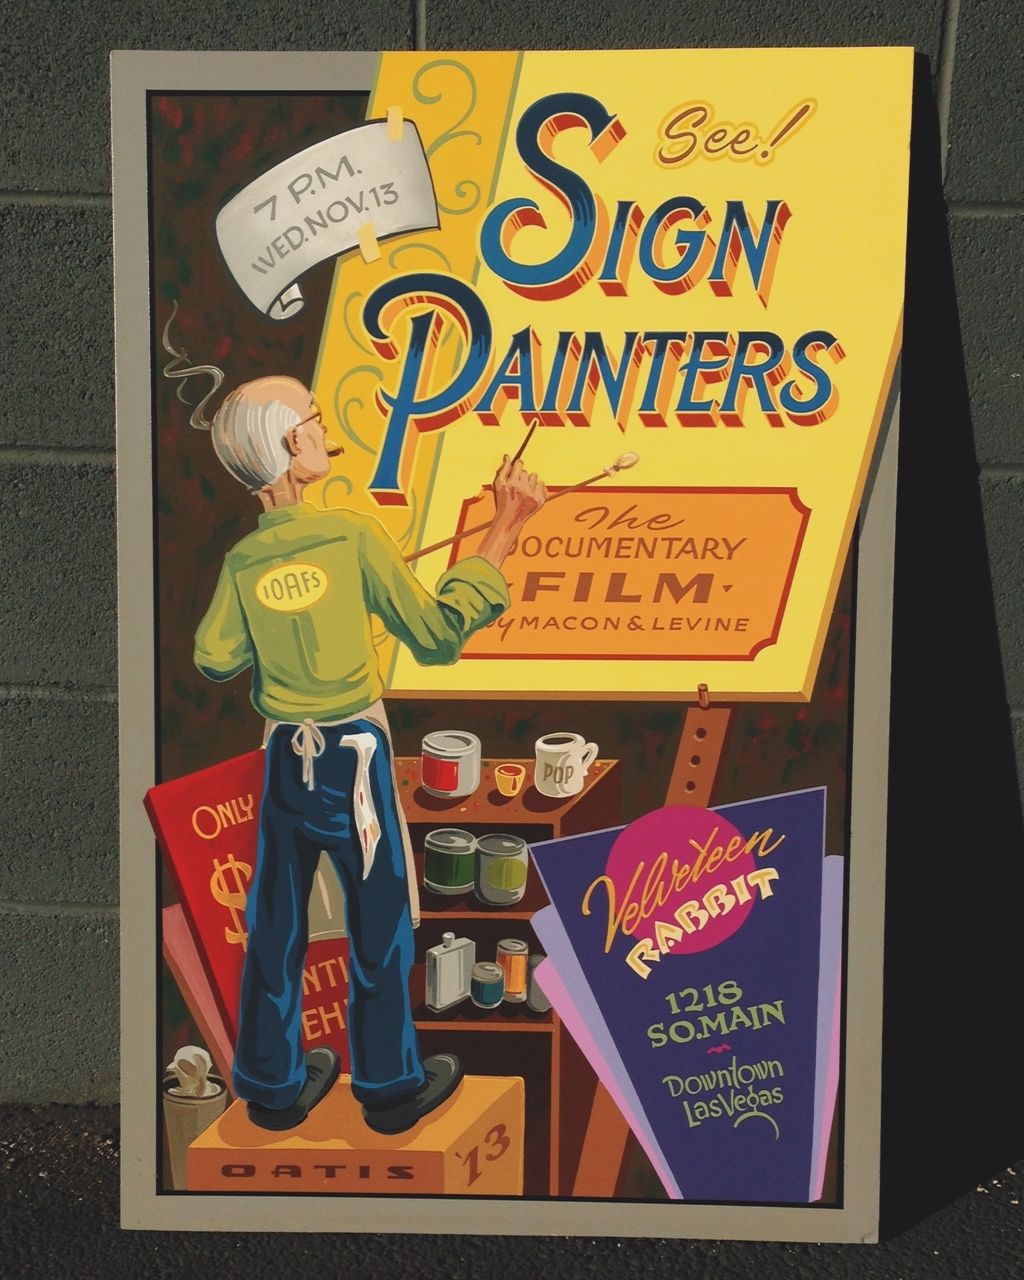 Illustration of man at an easel painting a sign.